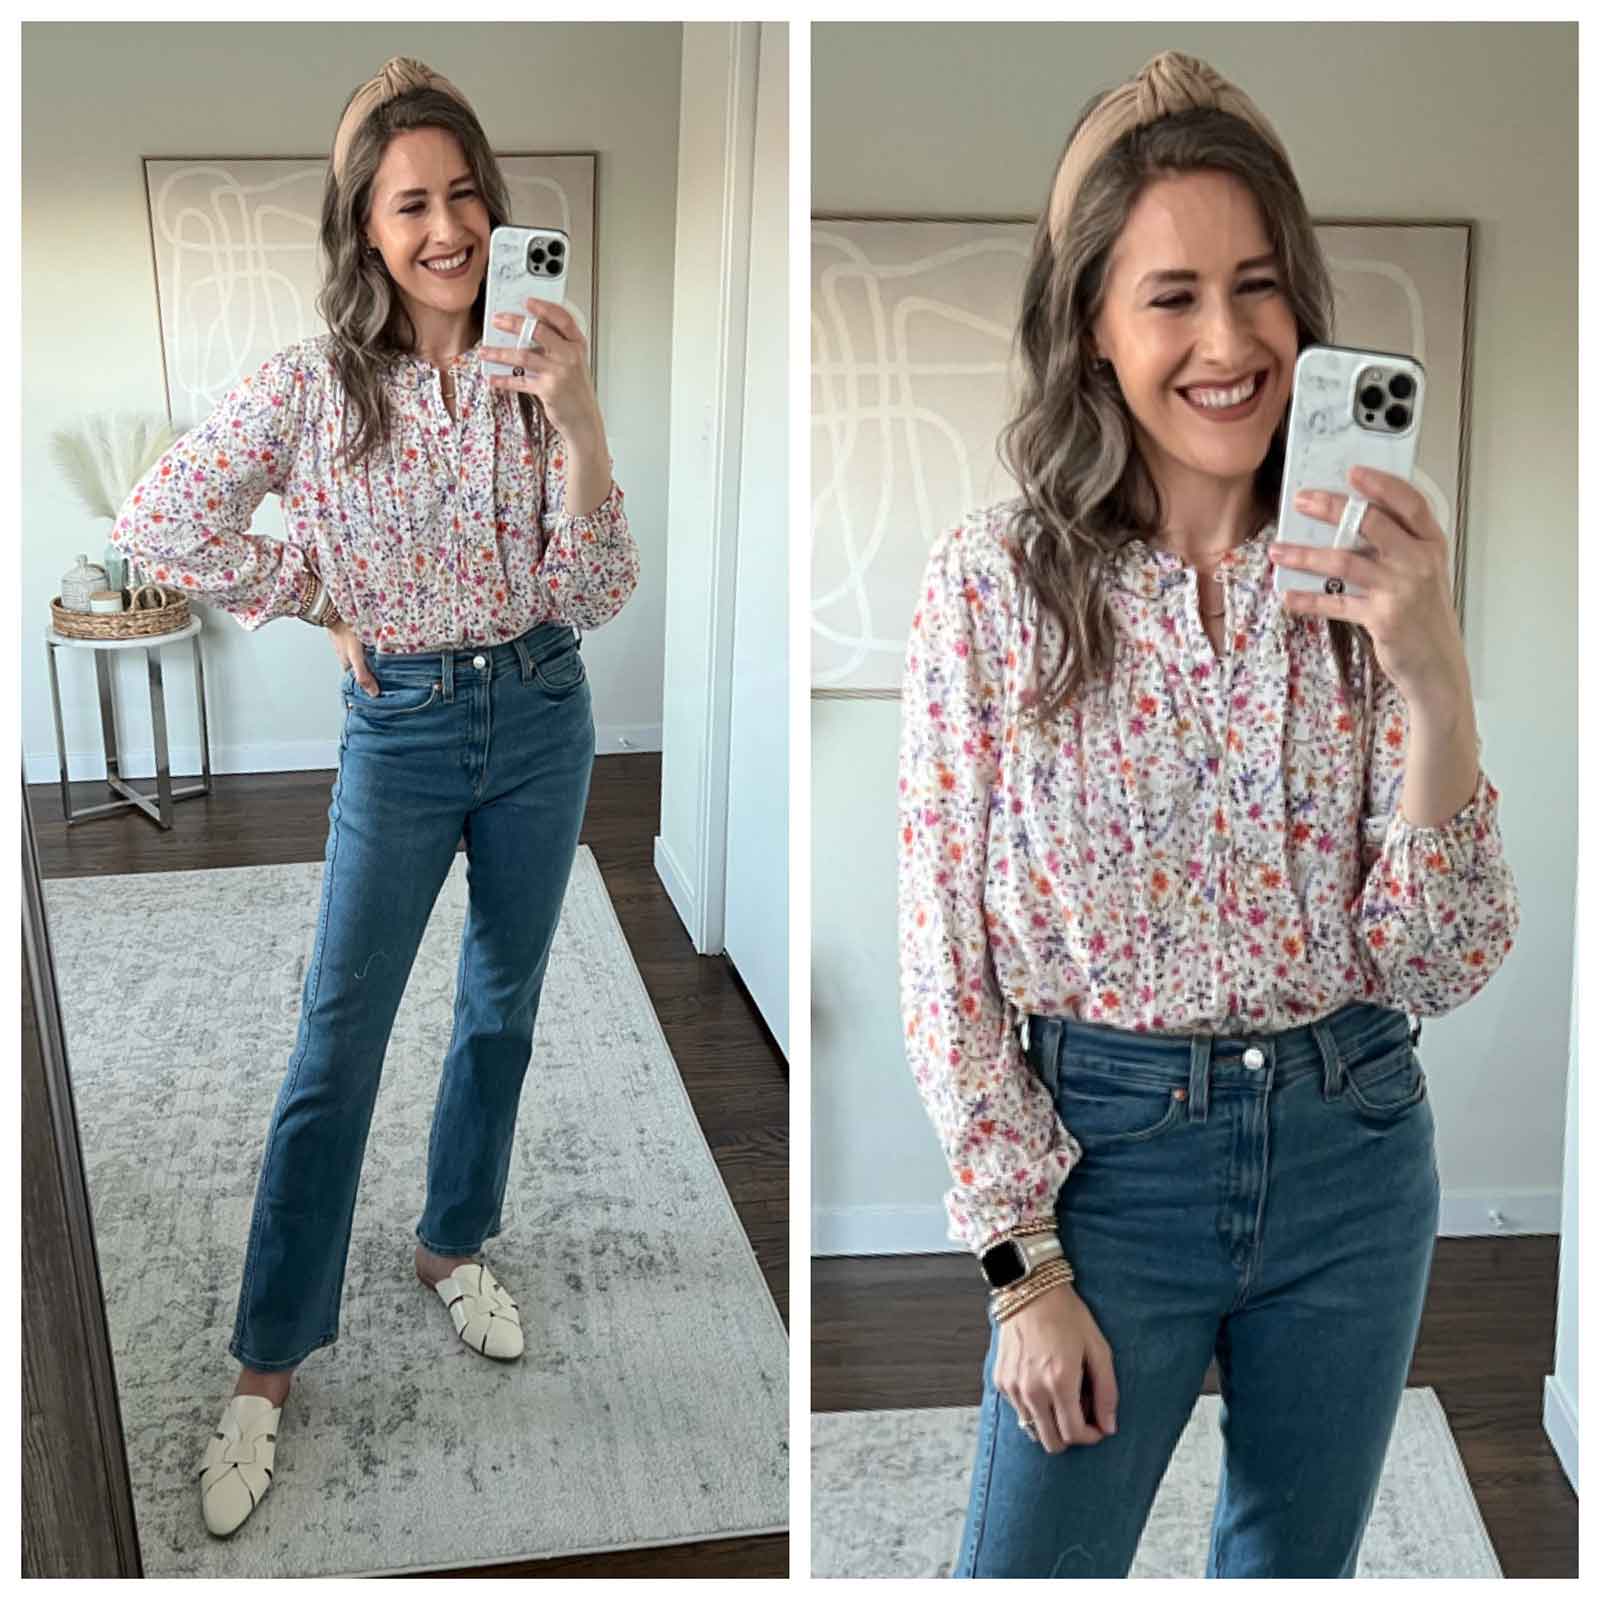 Walmart fashion blogger new spring arrivals try-on review haul